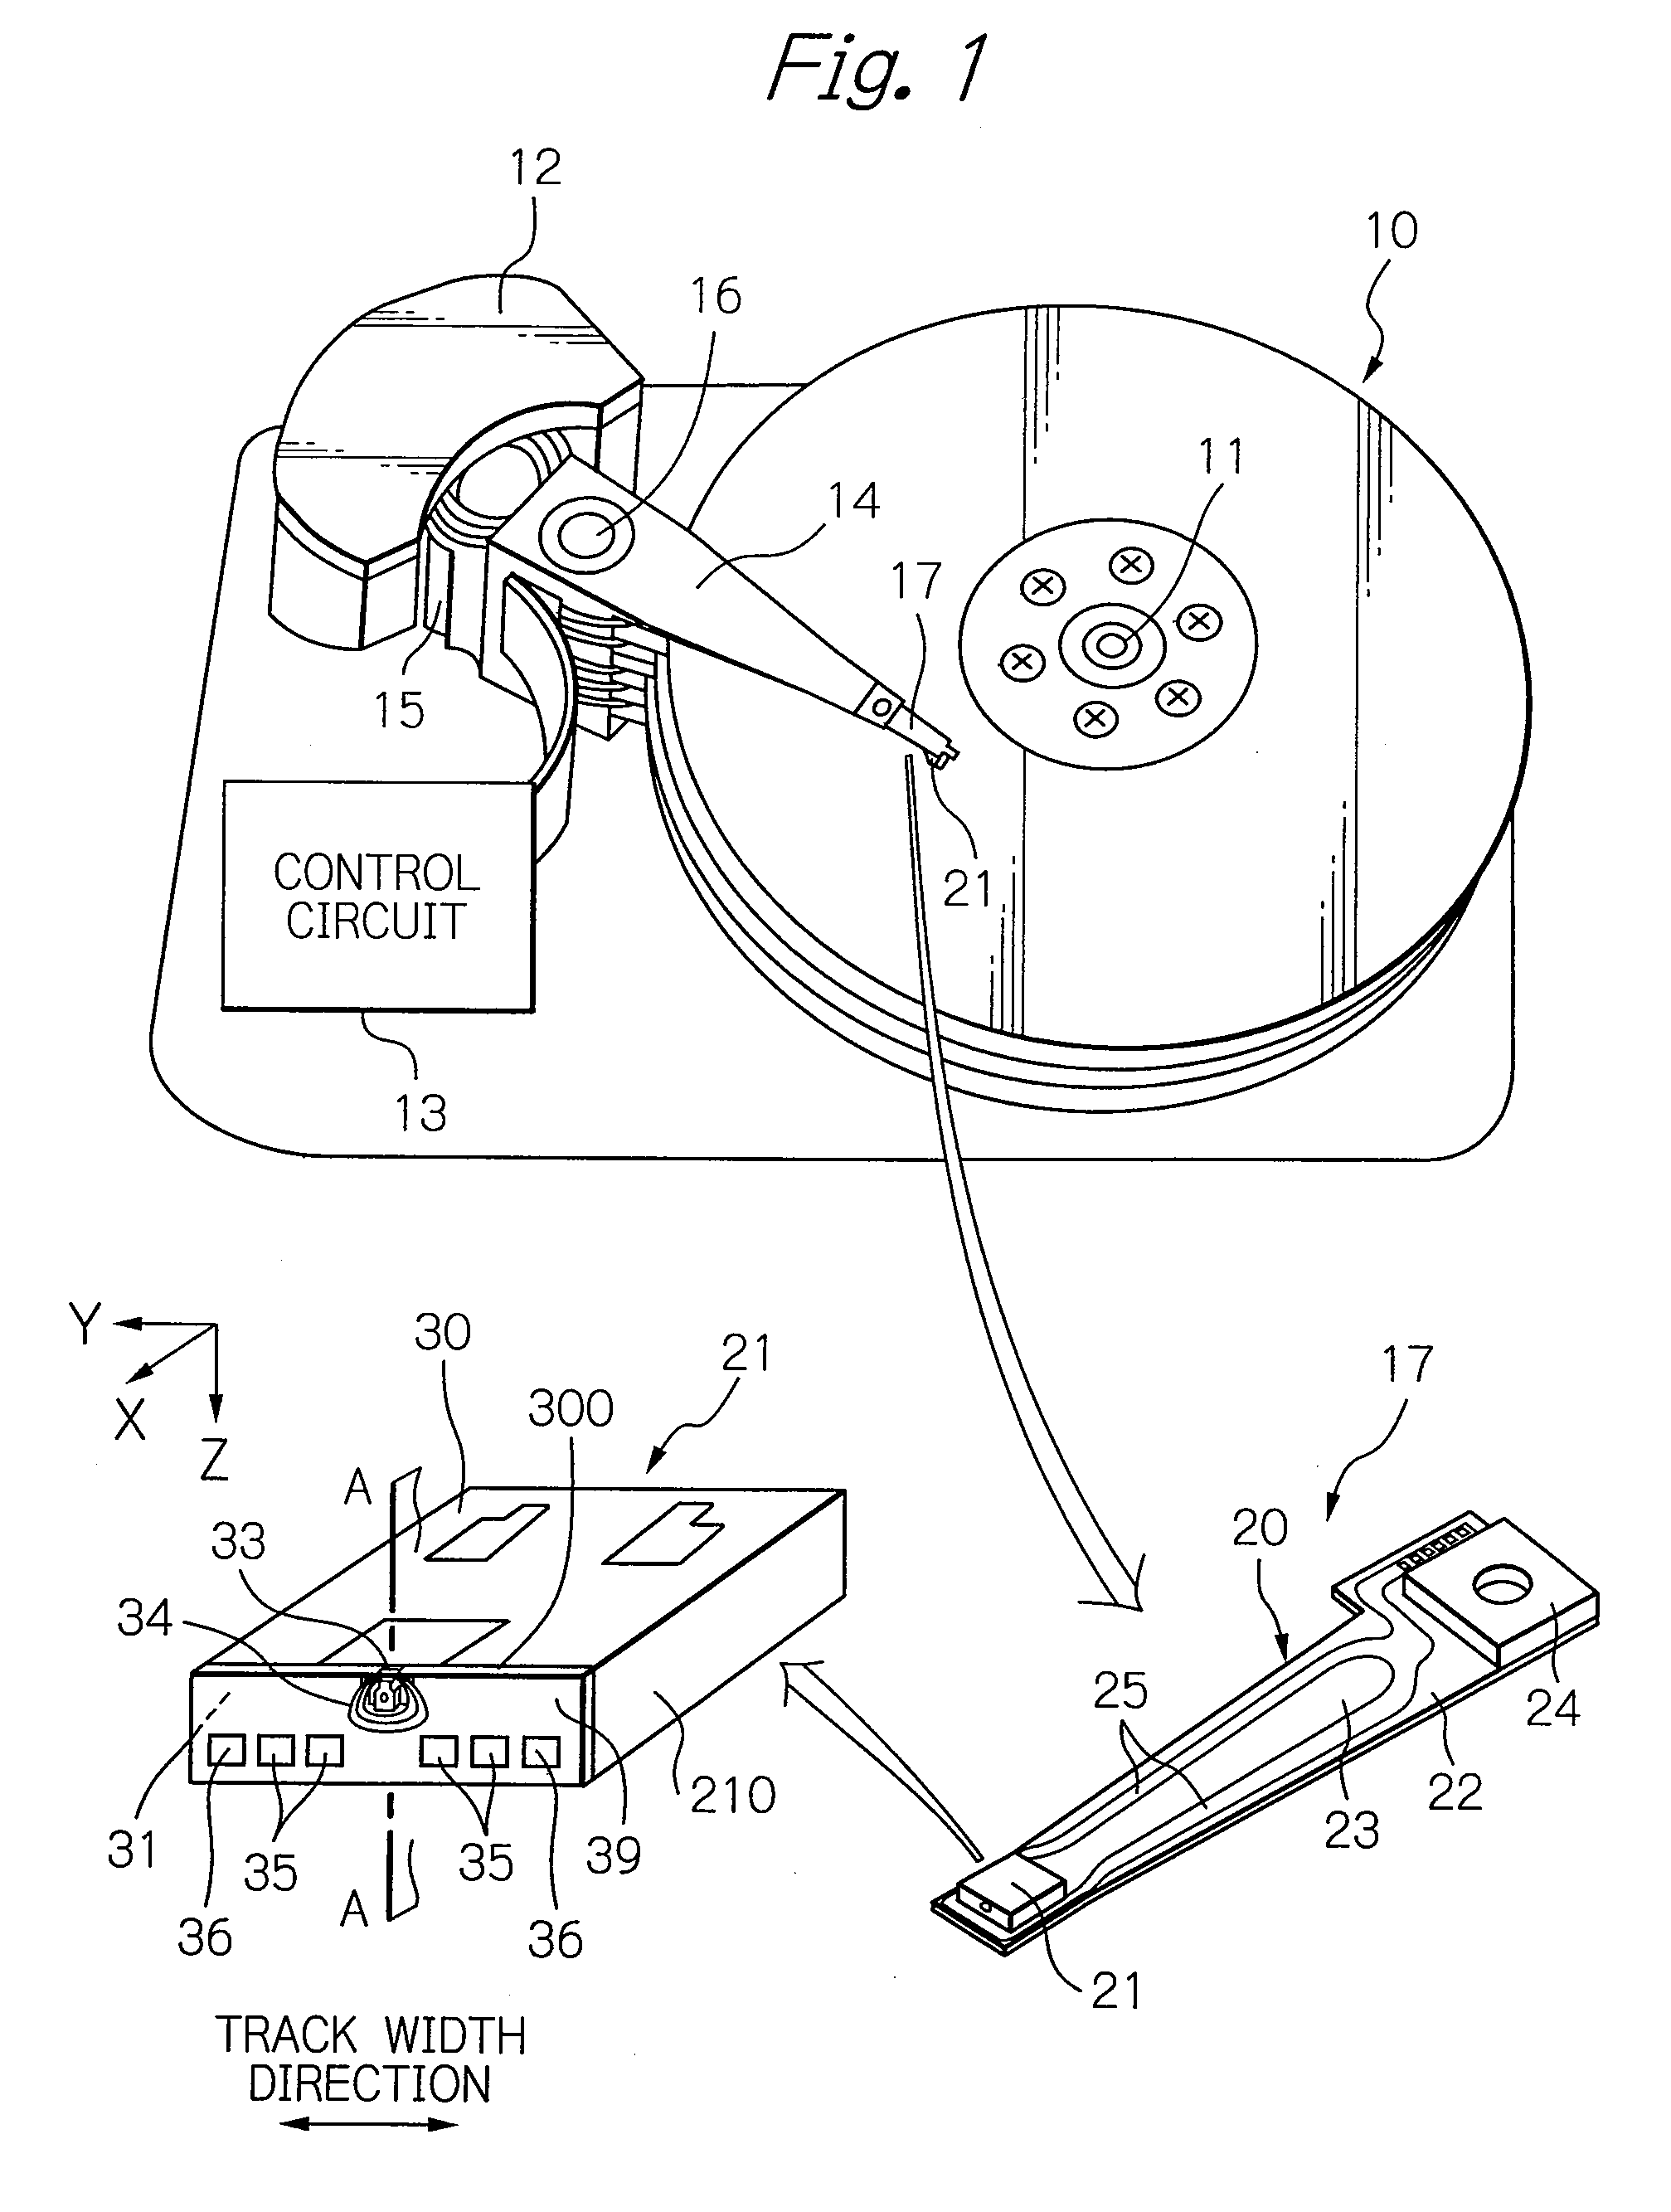 Thin-film magnetic head for microwave assist and microwave-assisted magnetic recording method